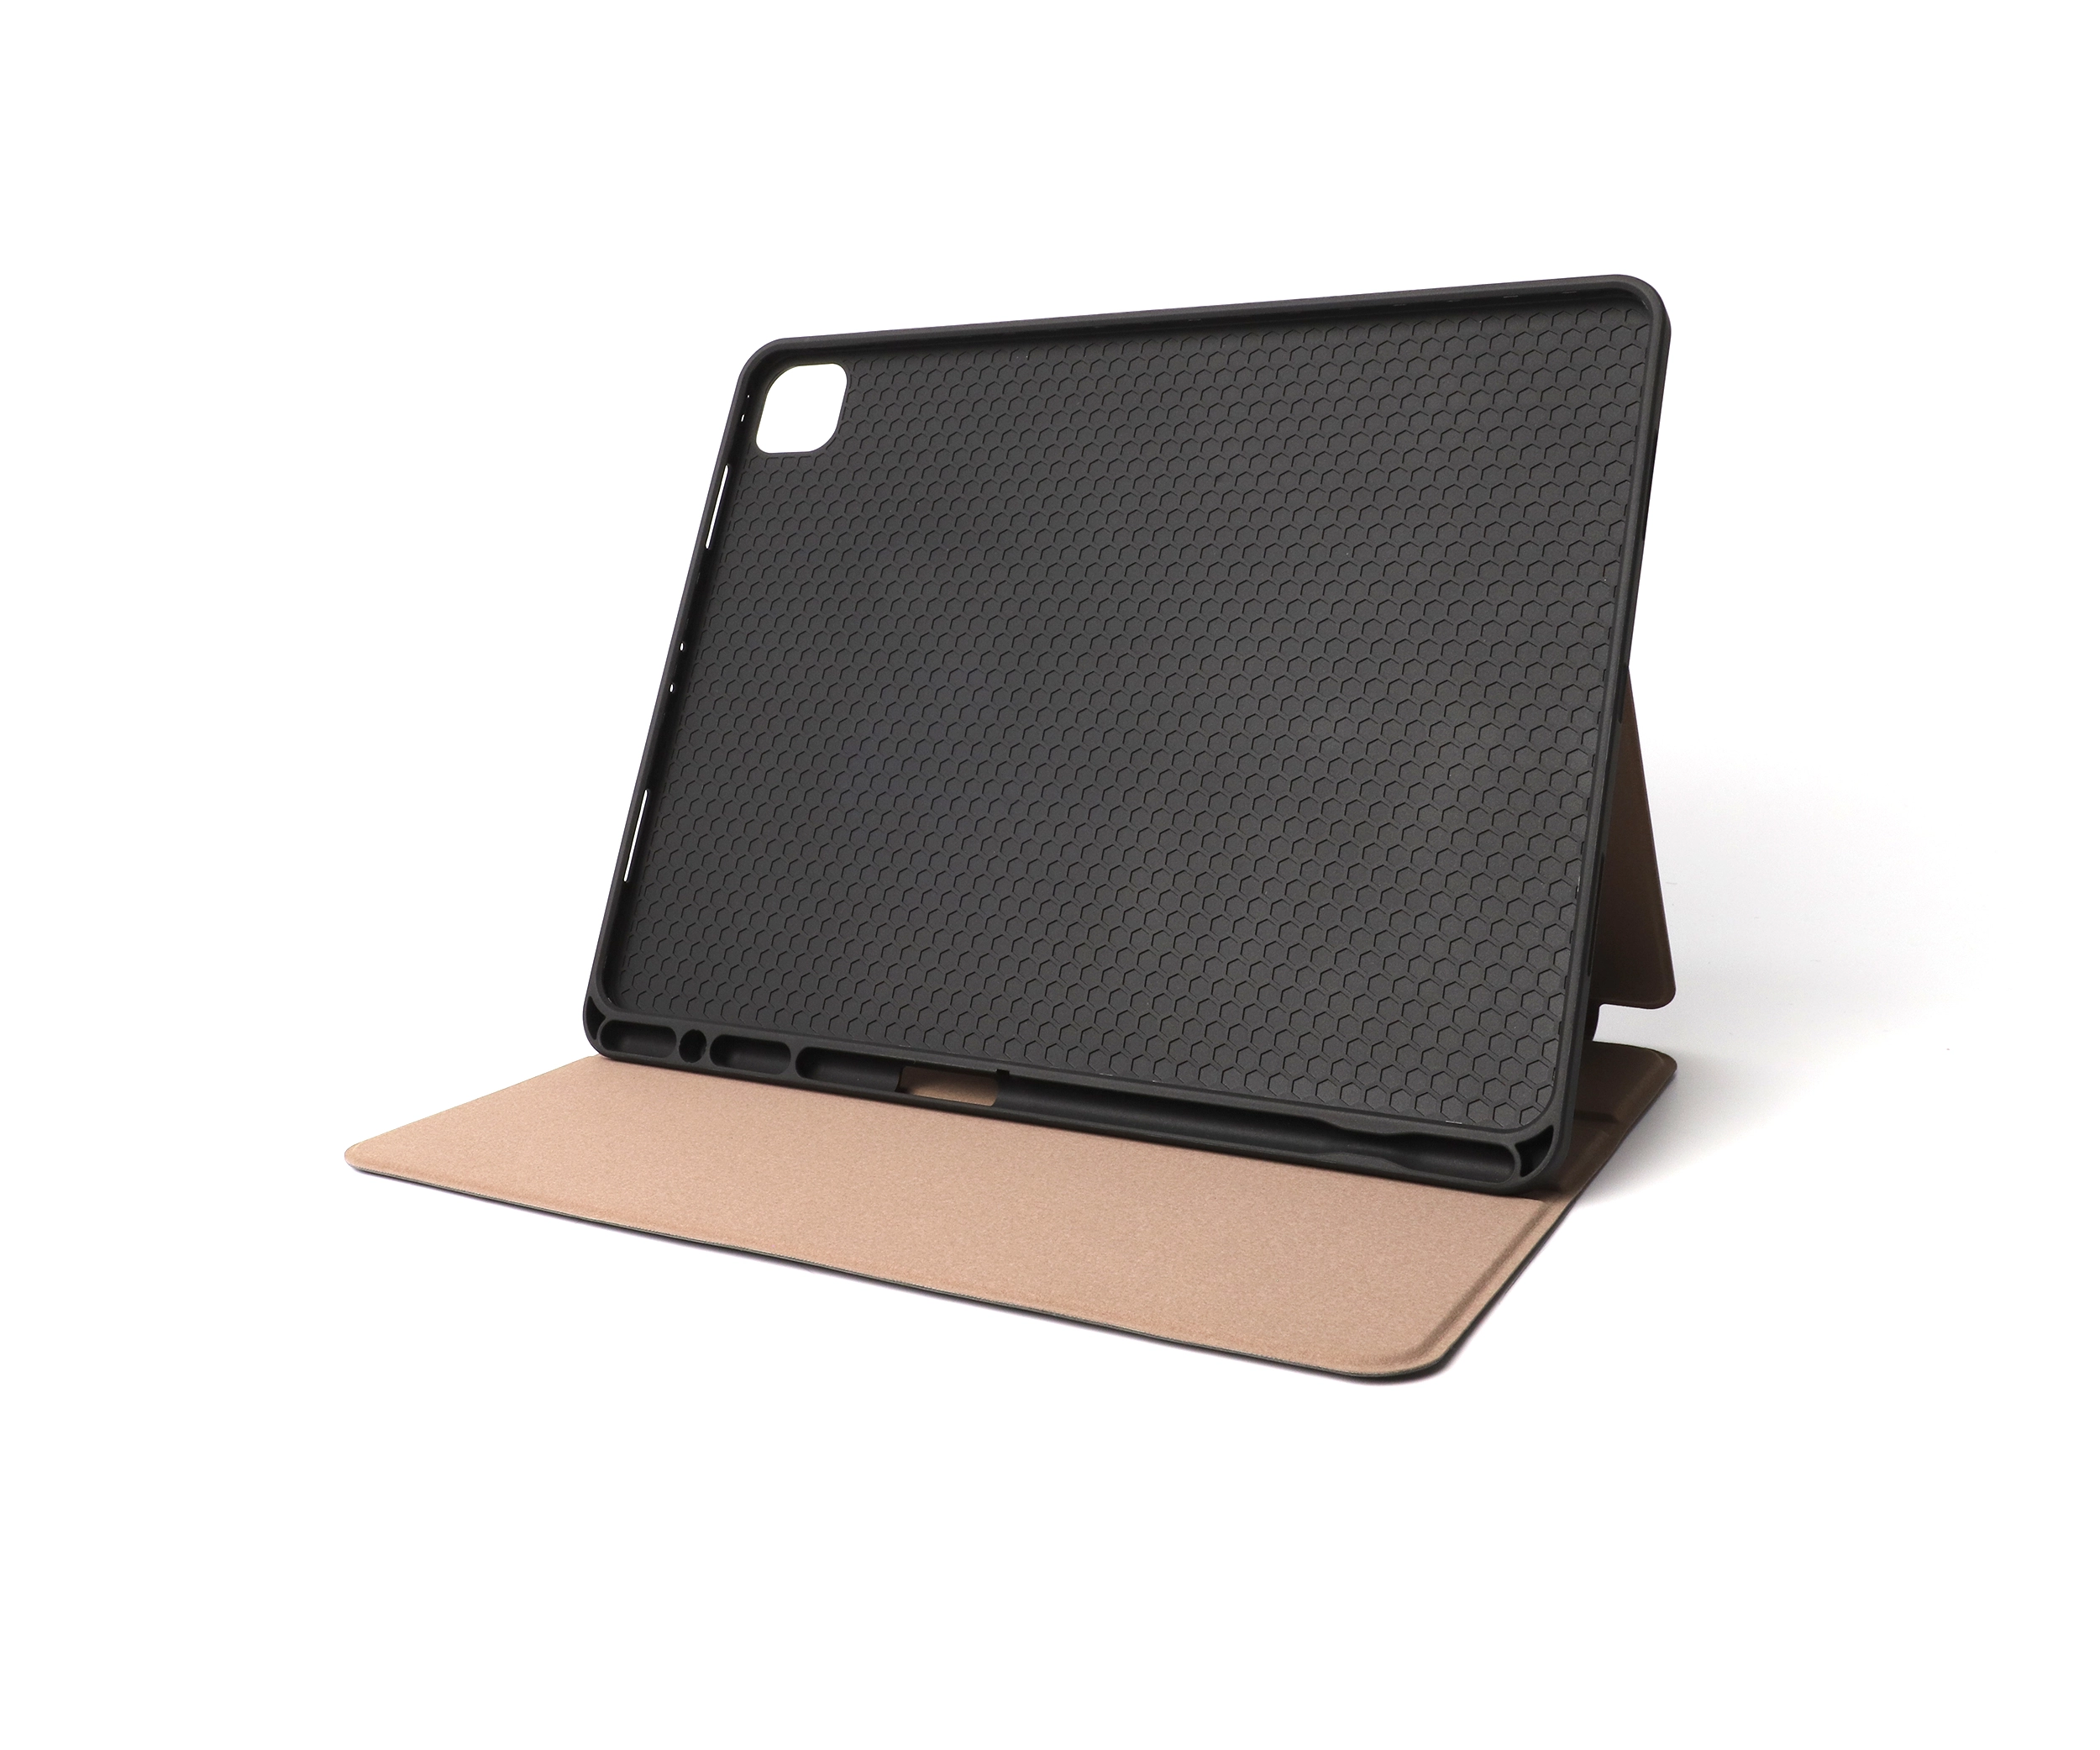 Tips to Consider's Needs for Choosing an iPad Pro 12.9'' 2021 Folio Leather Case